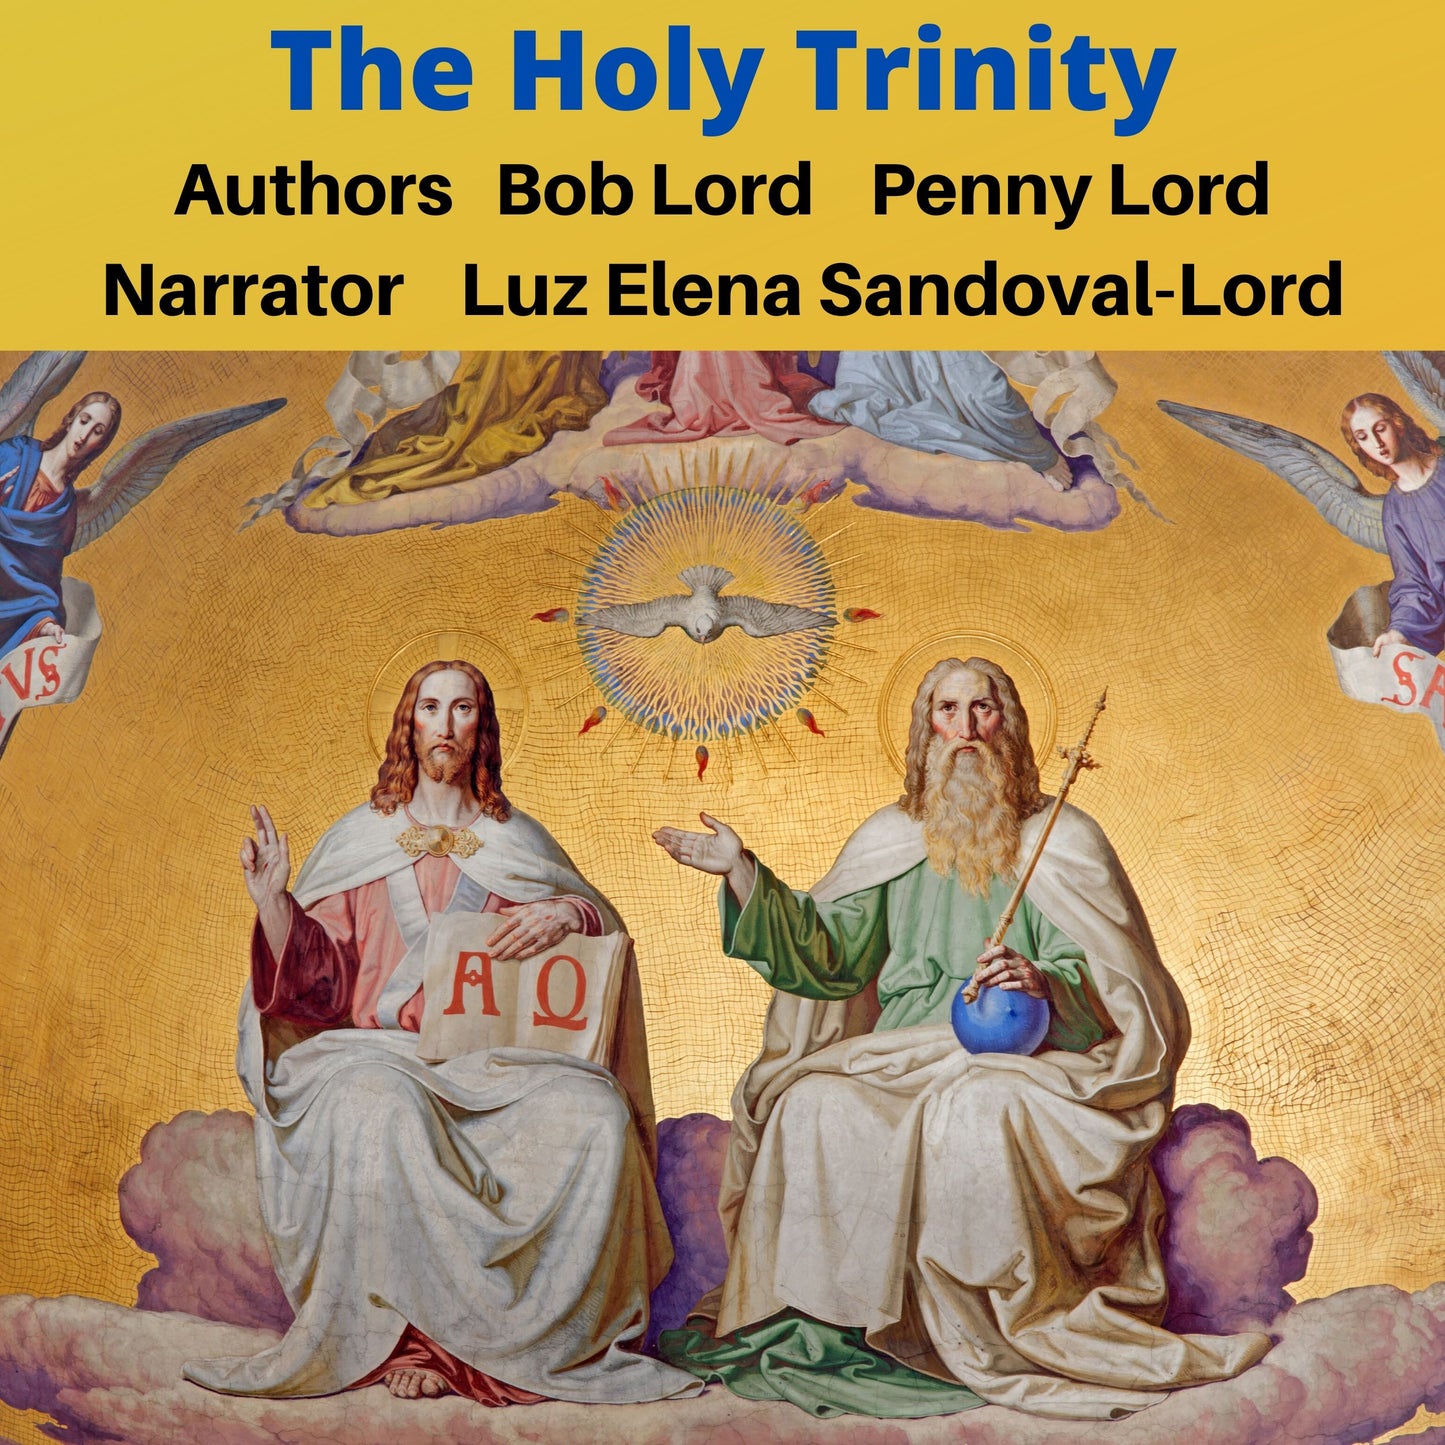 The Holy Trinity Audiobook - Bob and Penny Lord